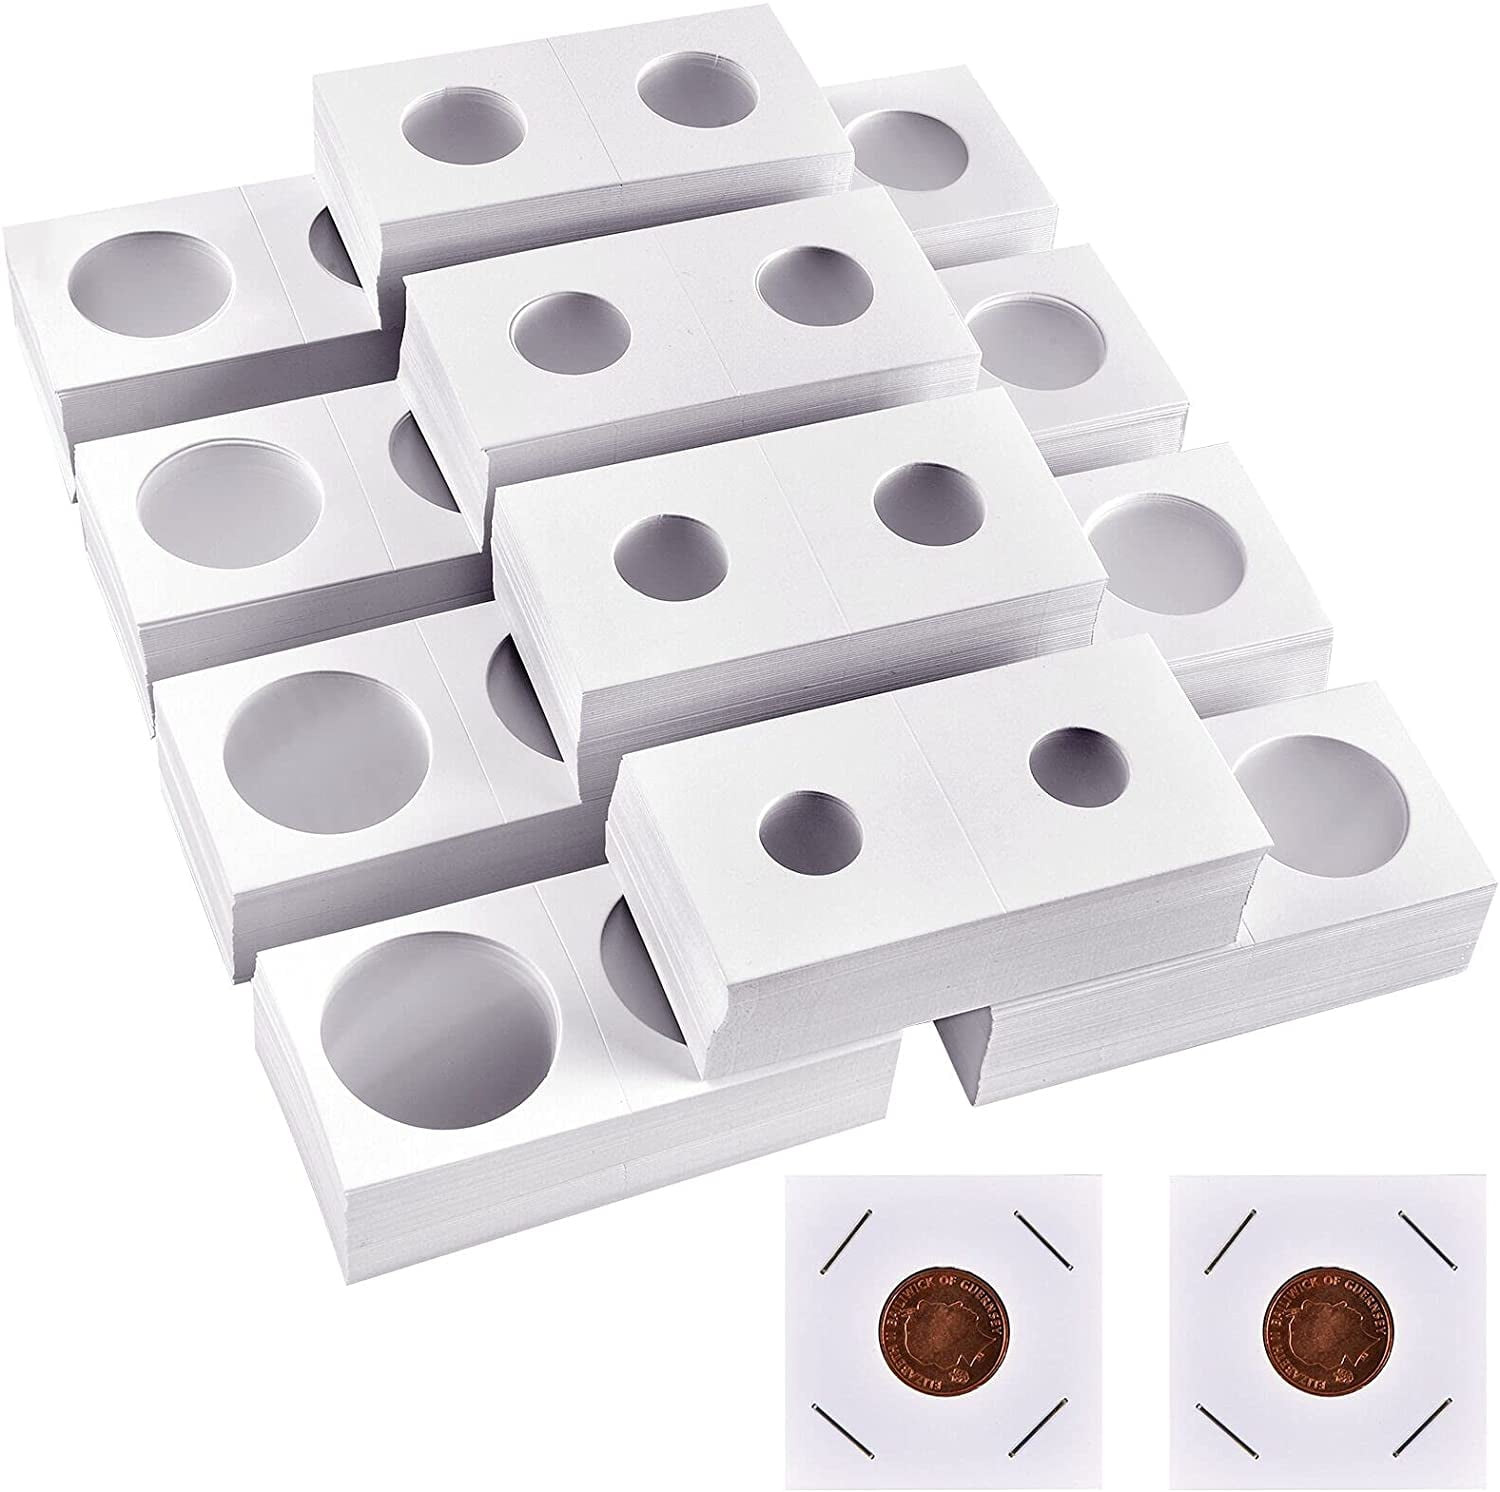 GCG31TN Nexxxi 300 Pcs Cardboard Coin Holder, 6 Sizes 2 x 2 Currency  Holders for Coin Collection Supplies (6-Size)